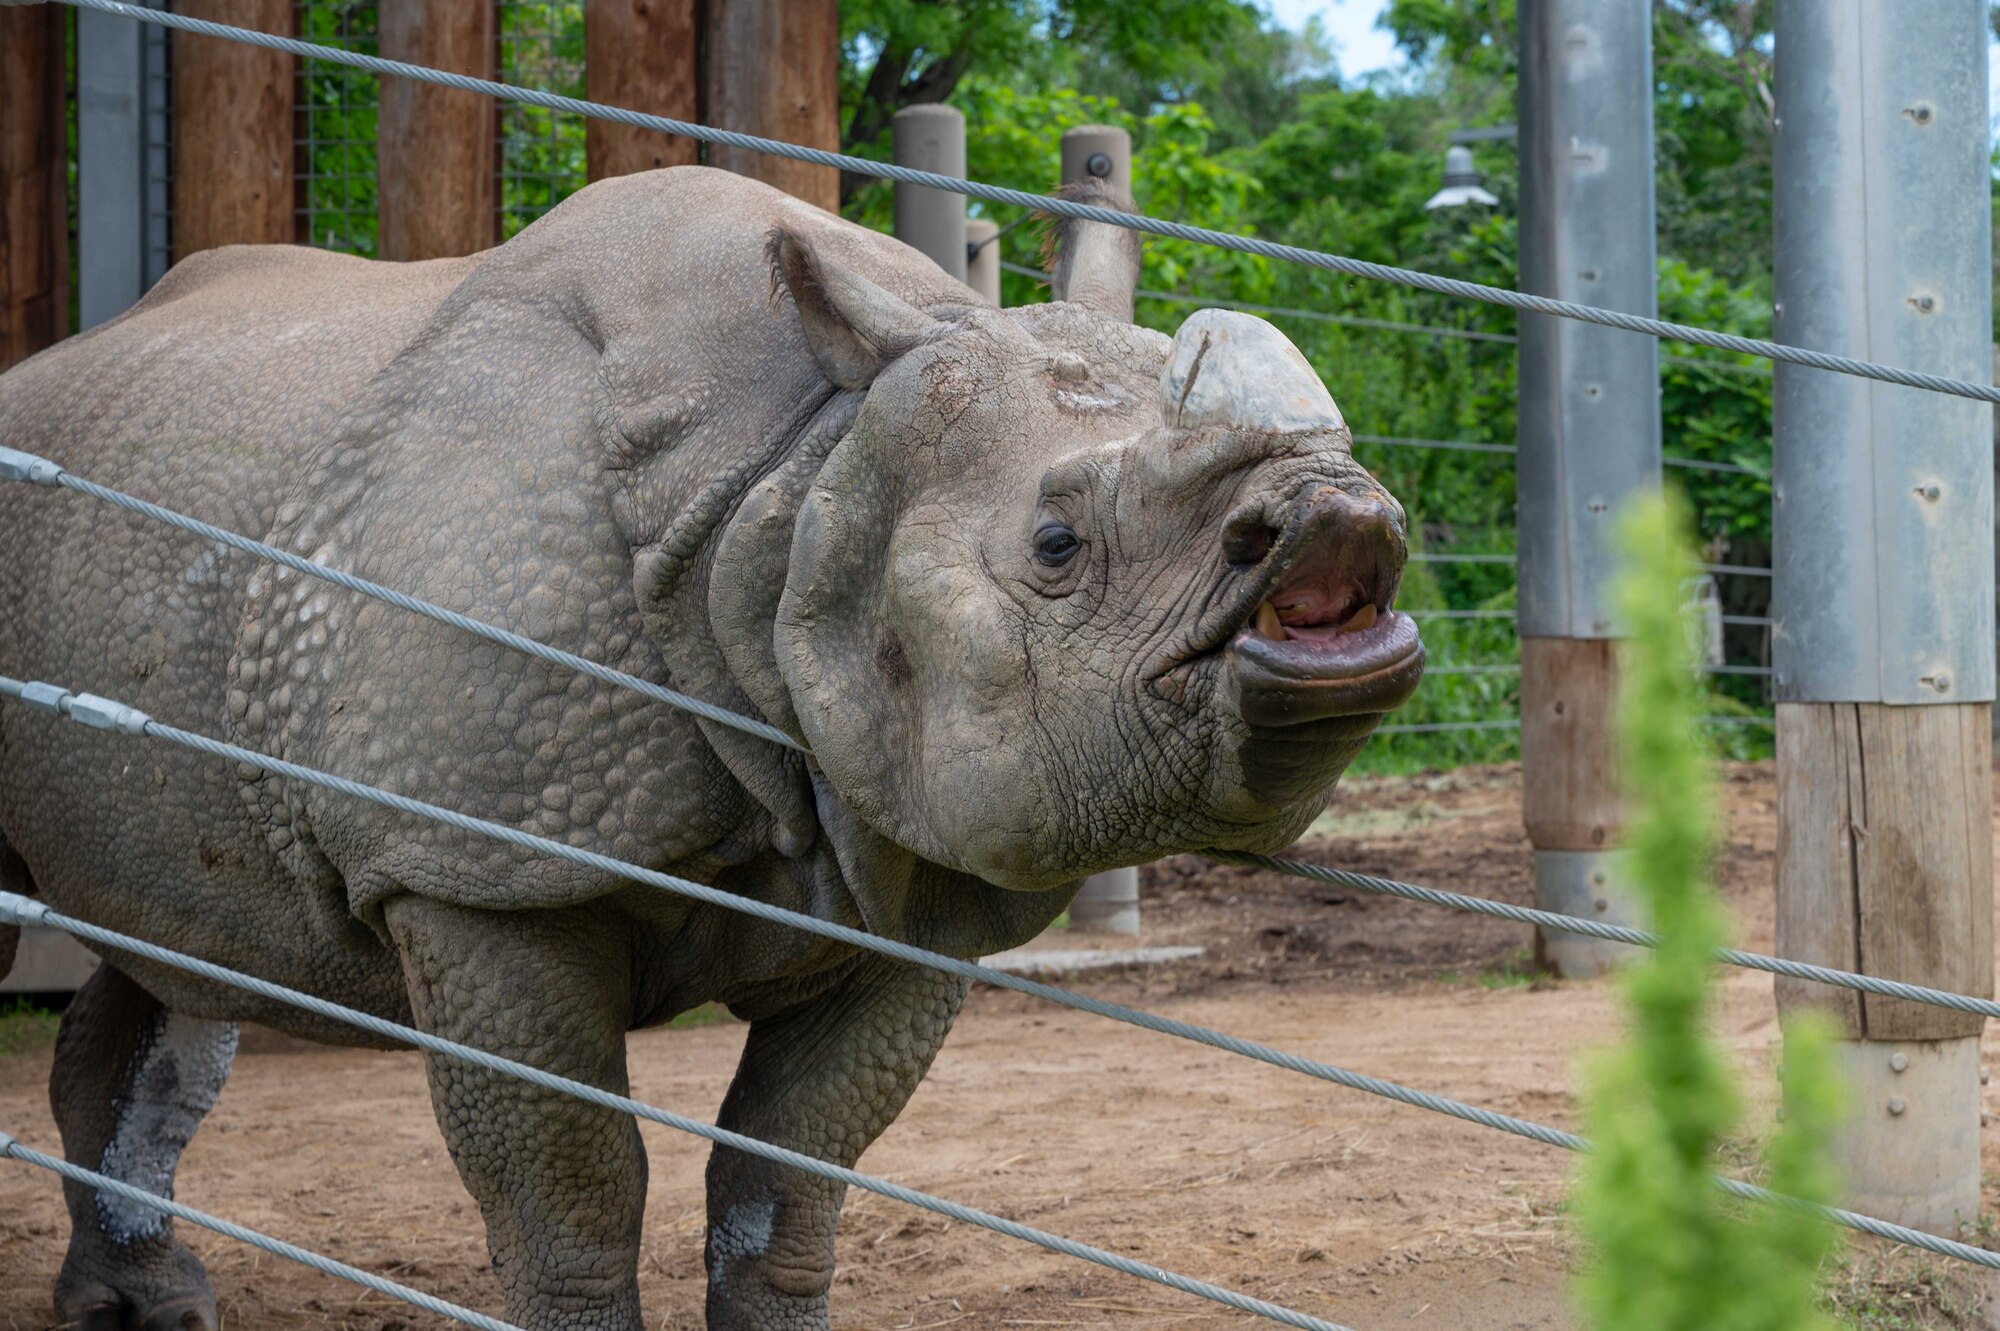 A  rhinoceros at the zoo